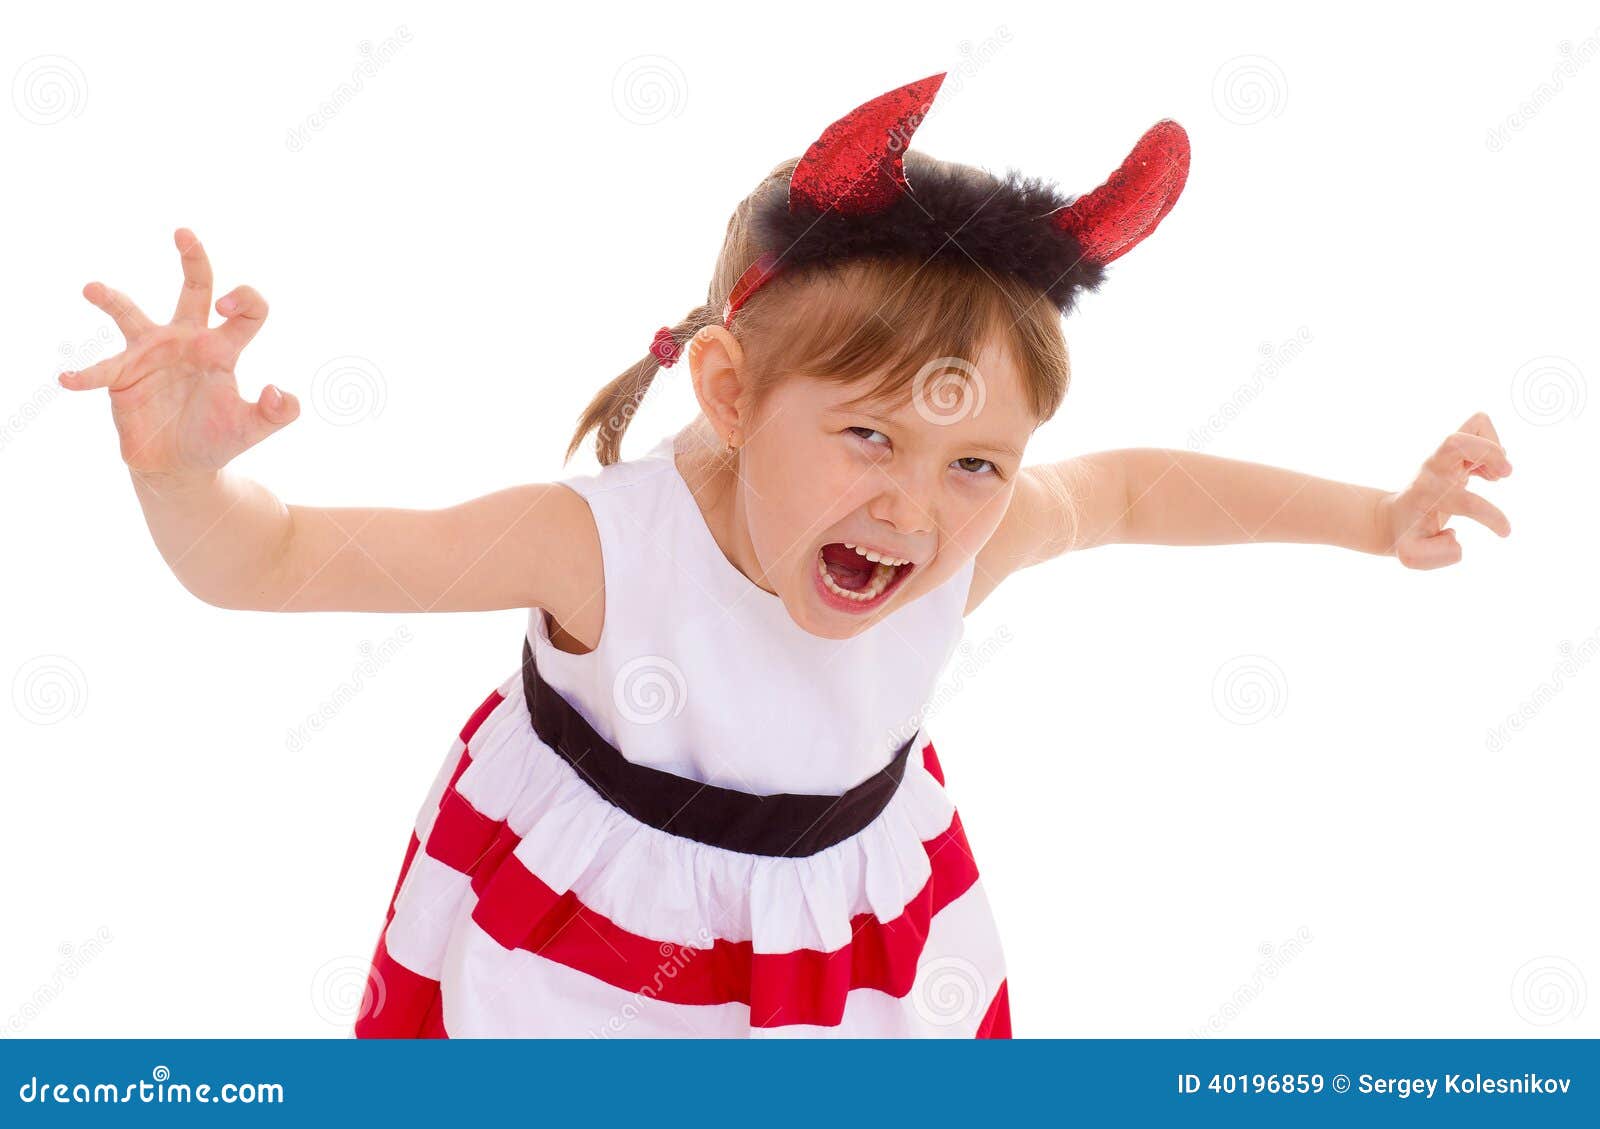 A Young Girl Wearing the Head Horns. Stock Image - Image of adorable ...